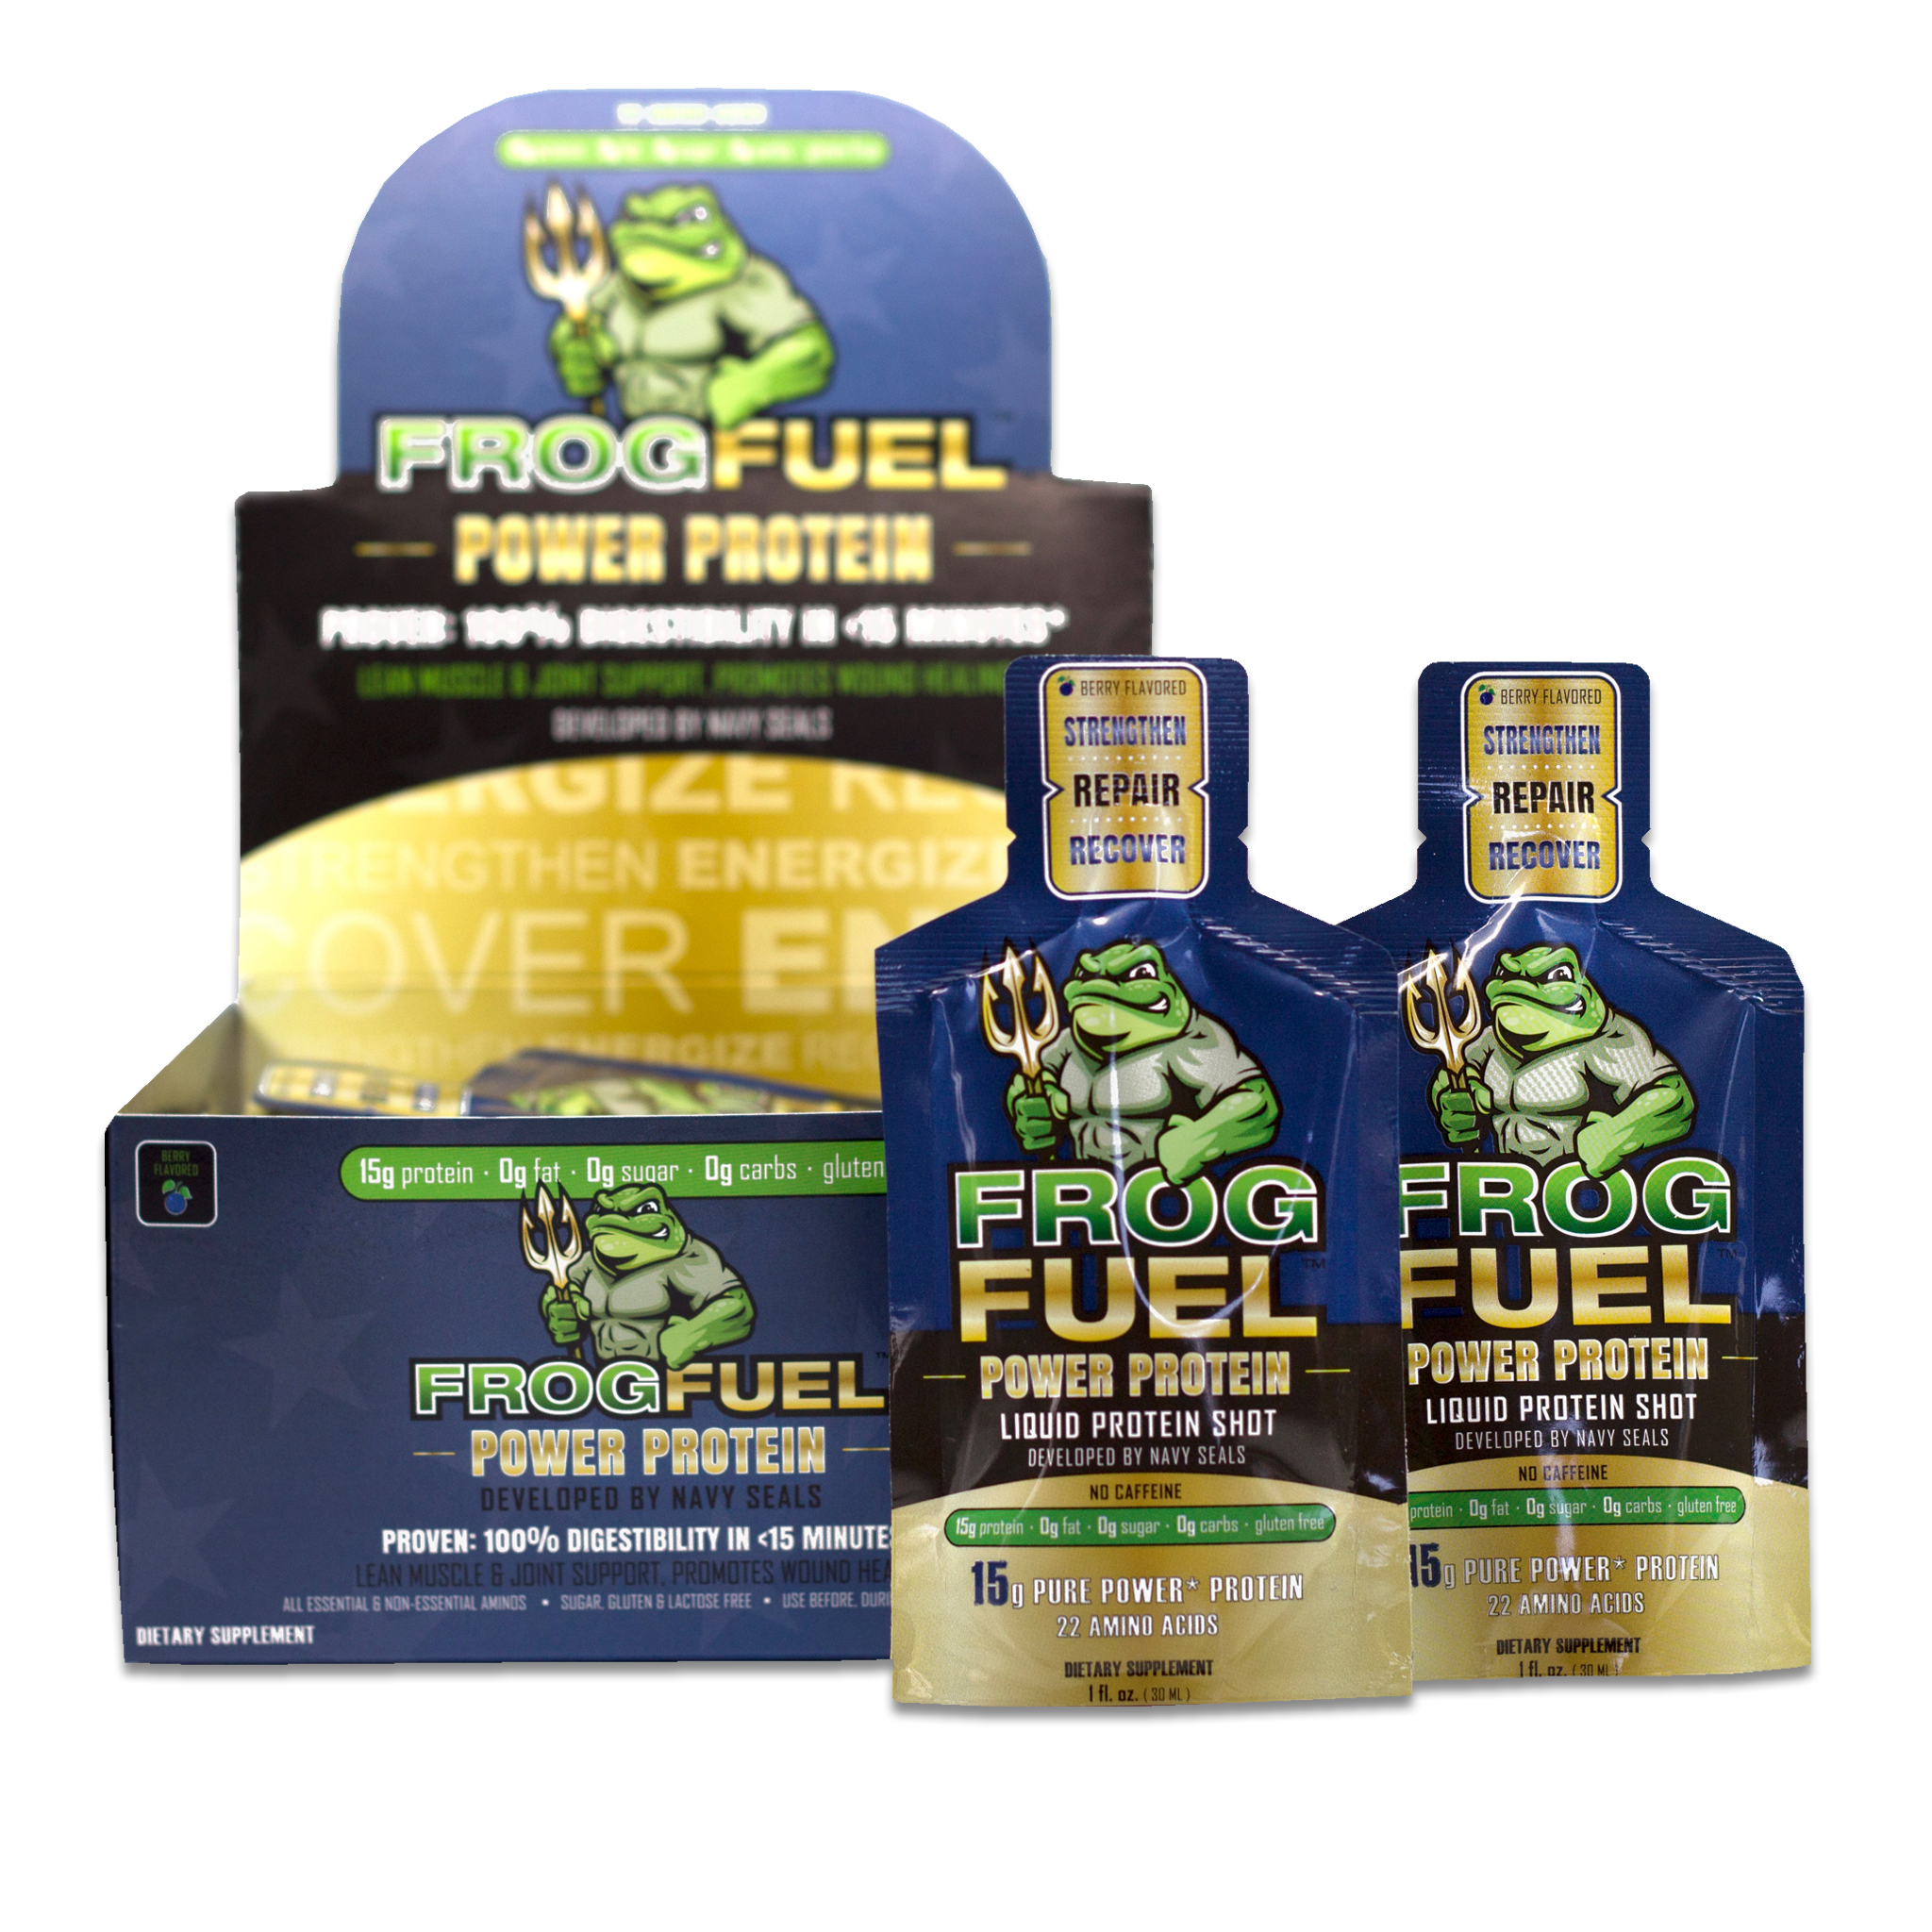 Frog Fuel Power Protein ( Box of 24 x 1 oz servings )